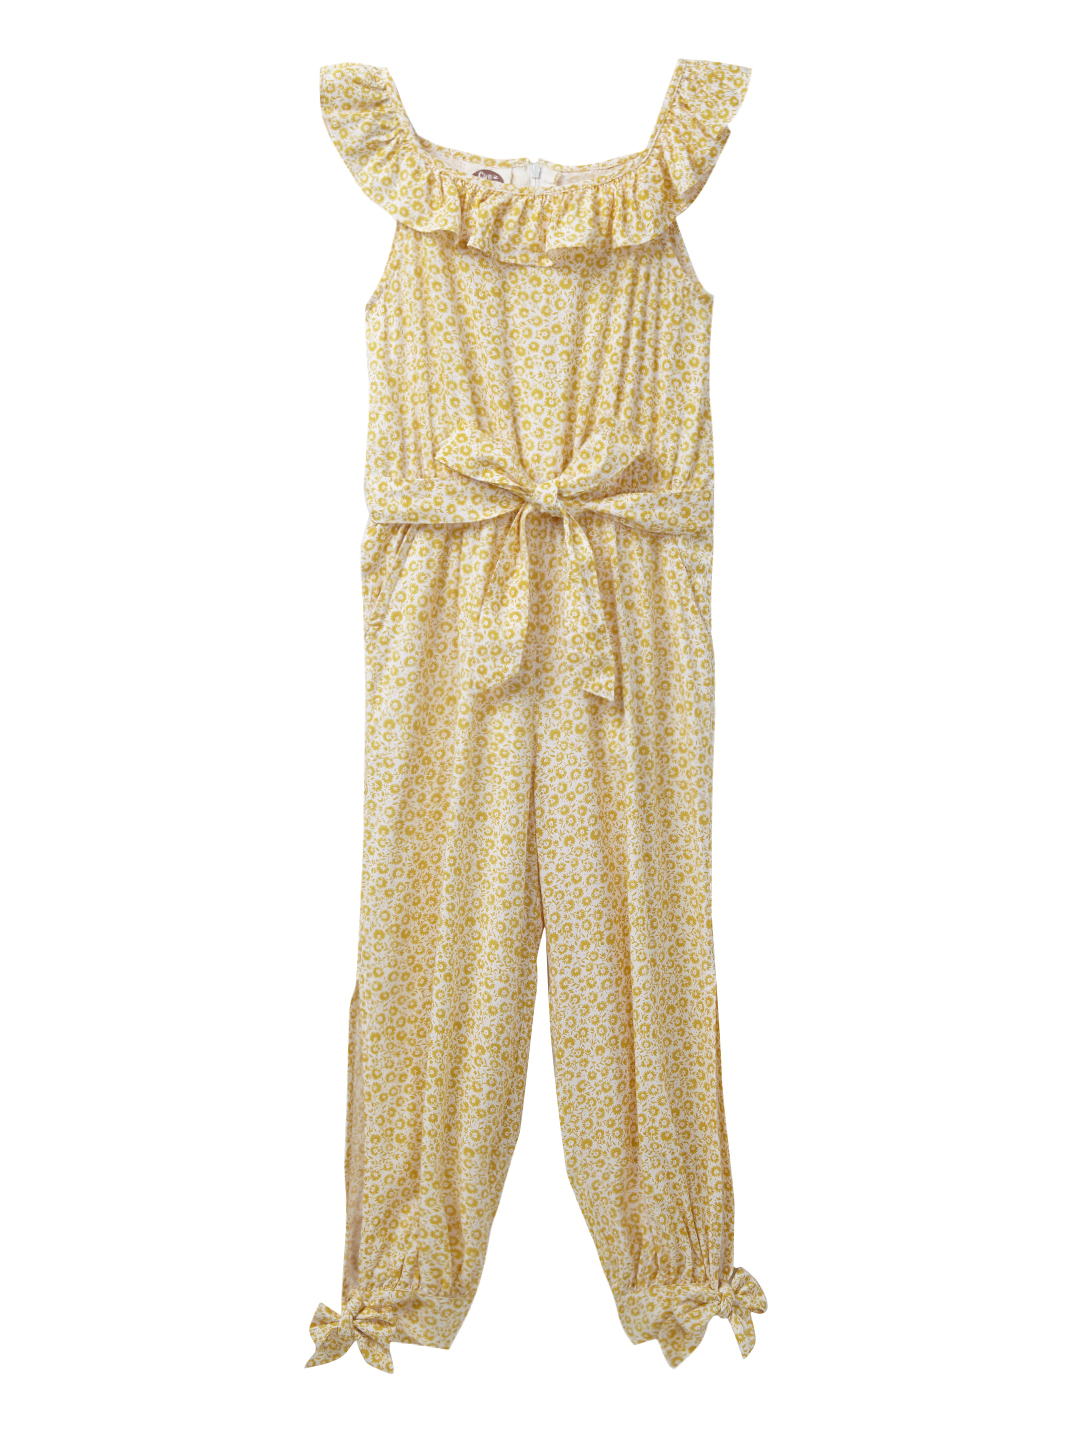 Ruffle Neck Jumpsuit for Girls with side slits and cuff Hem with Tie Knot